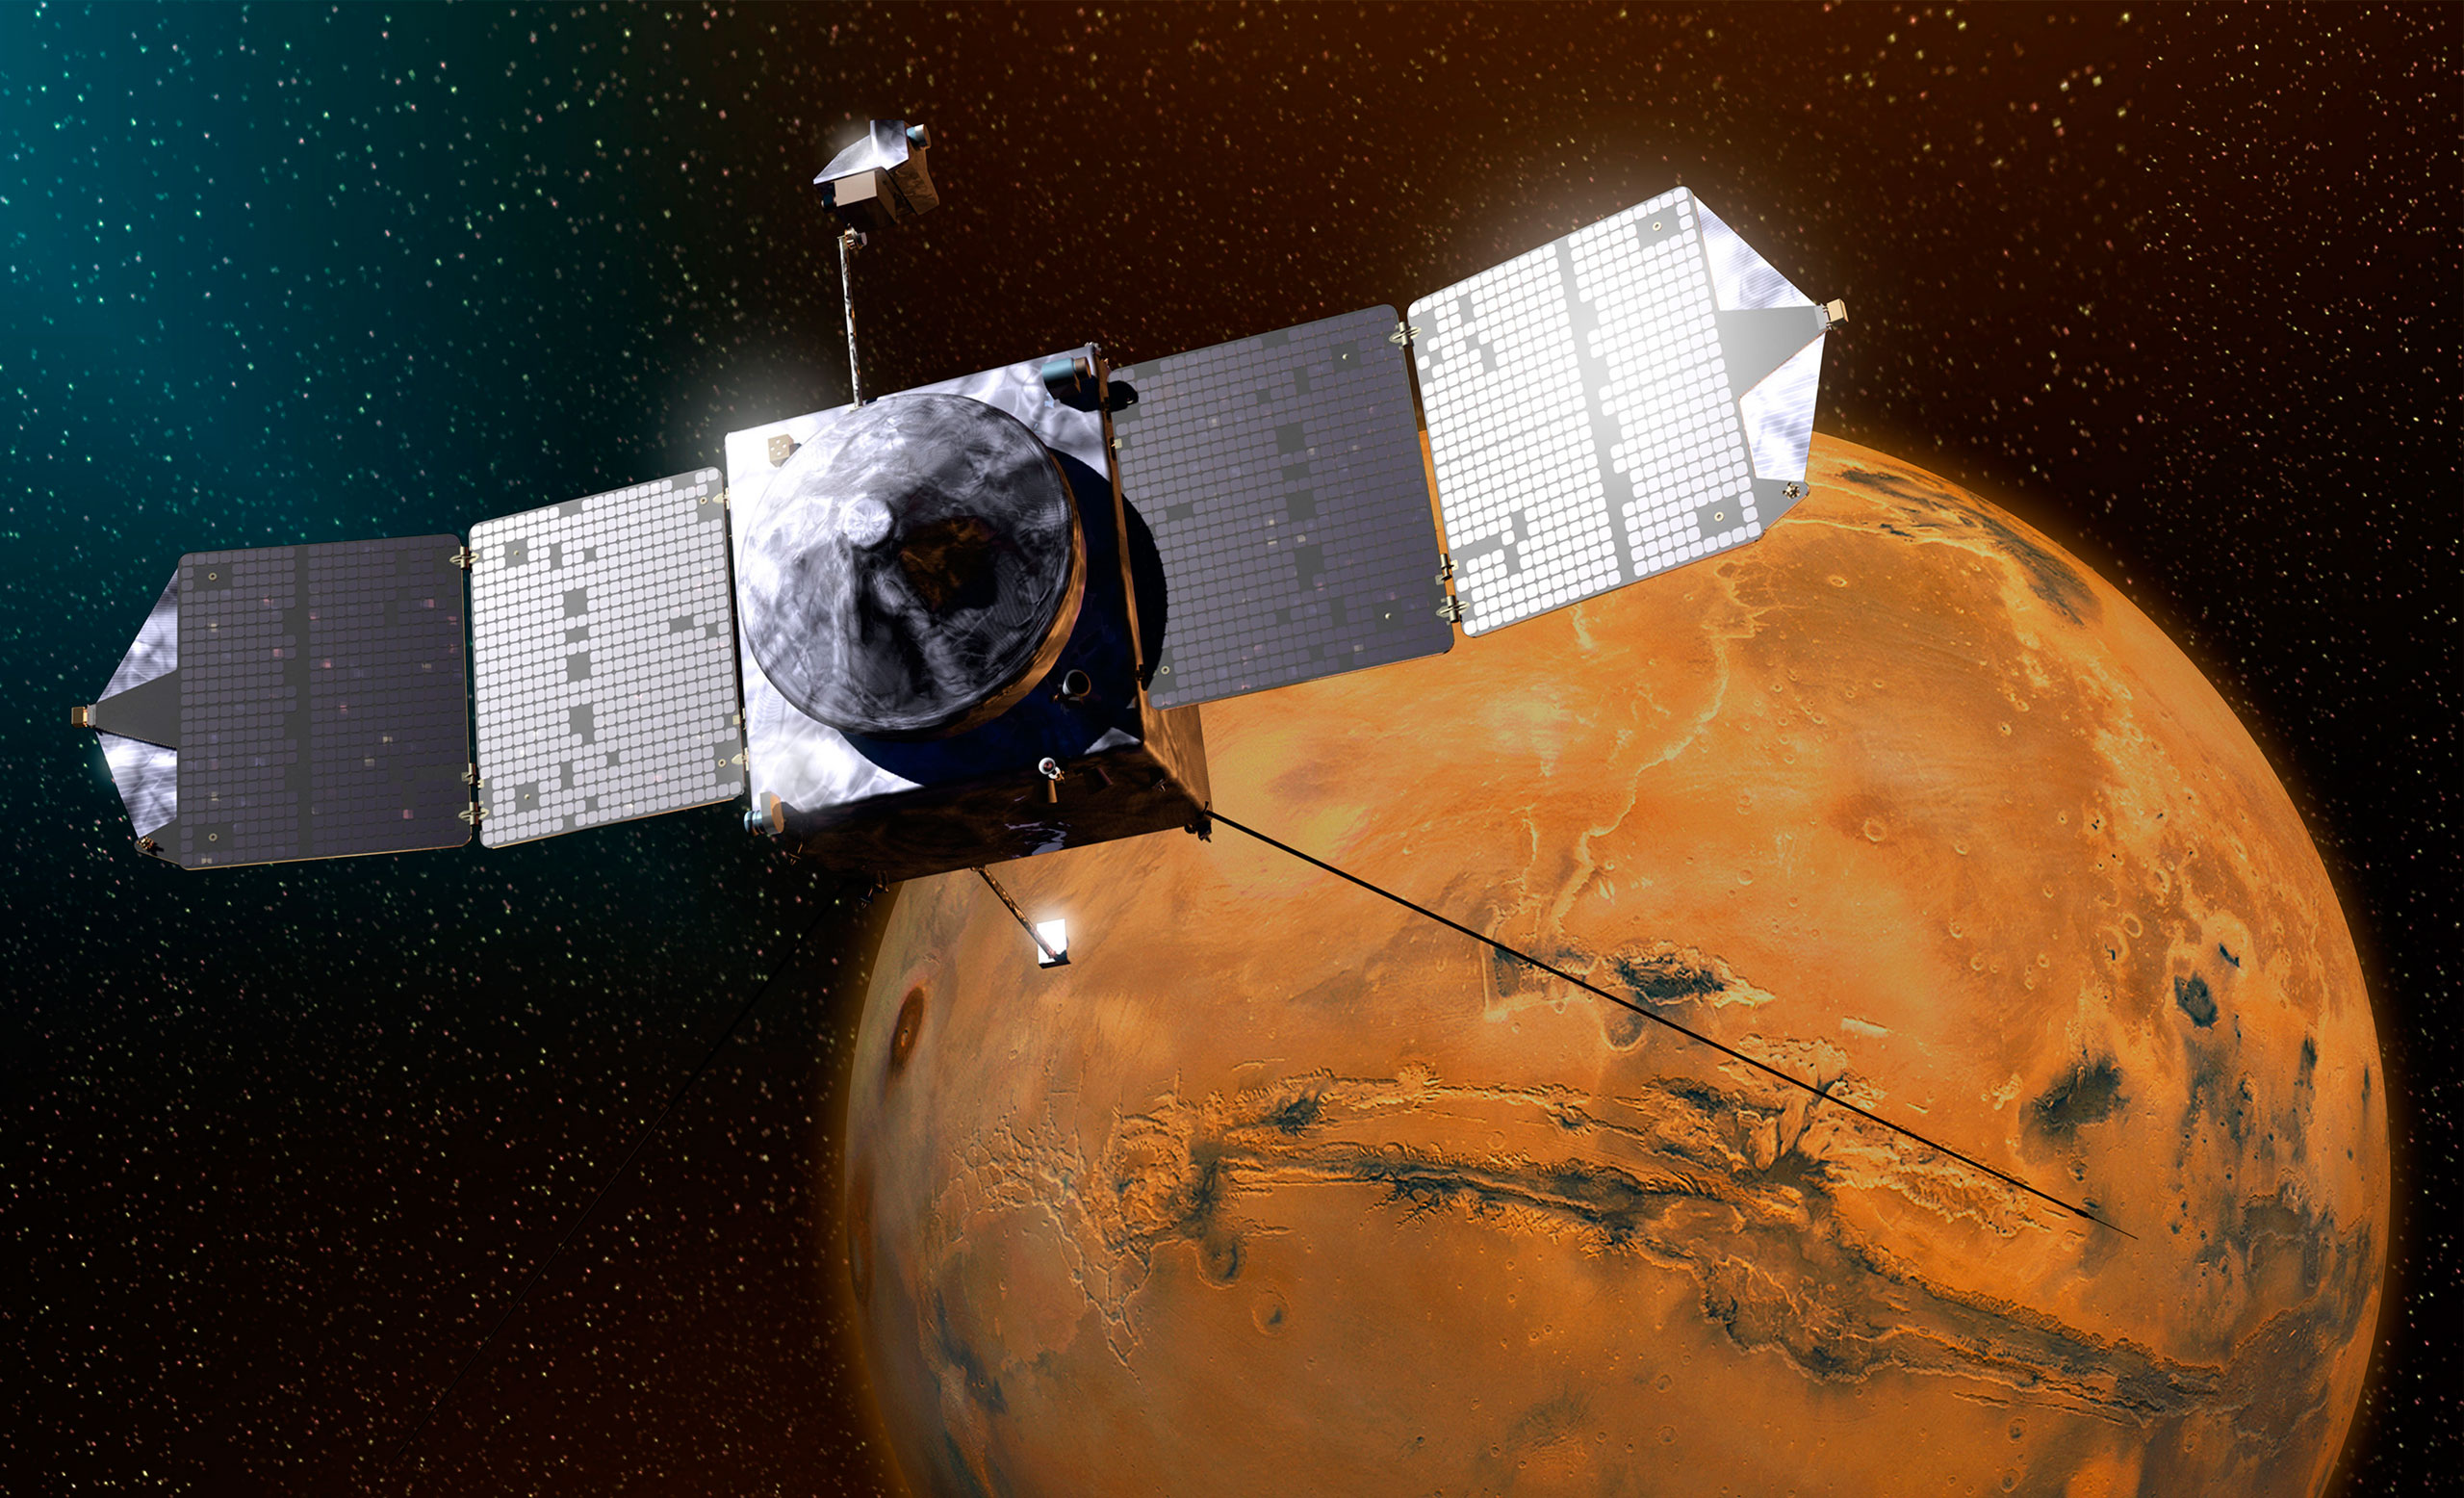 An artist concept of NASA's Mars Atmosphere and Volatile EvolutioN (MAVEN) mission. Launched in November 2013, the mission will explore the Red Planet’s upper atmosphere, ionosphere and interactions with the sun and solar wind.